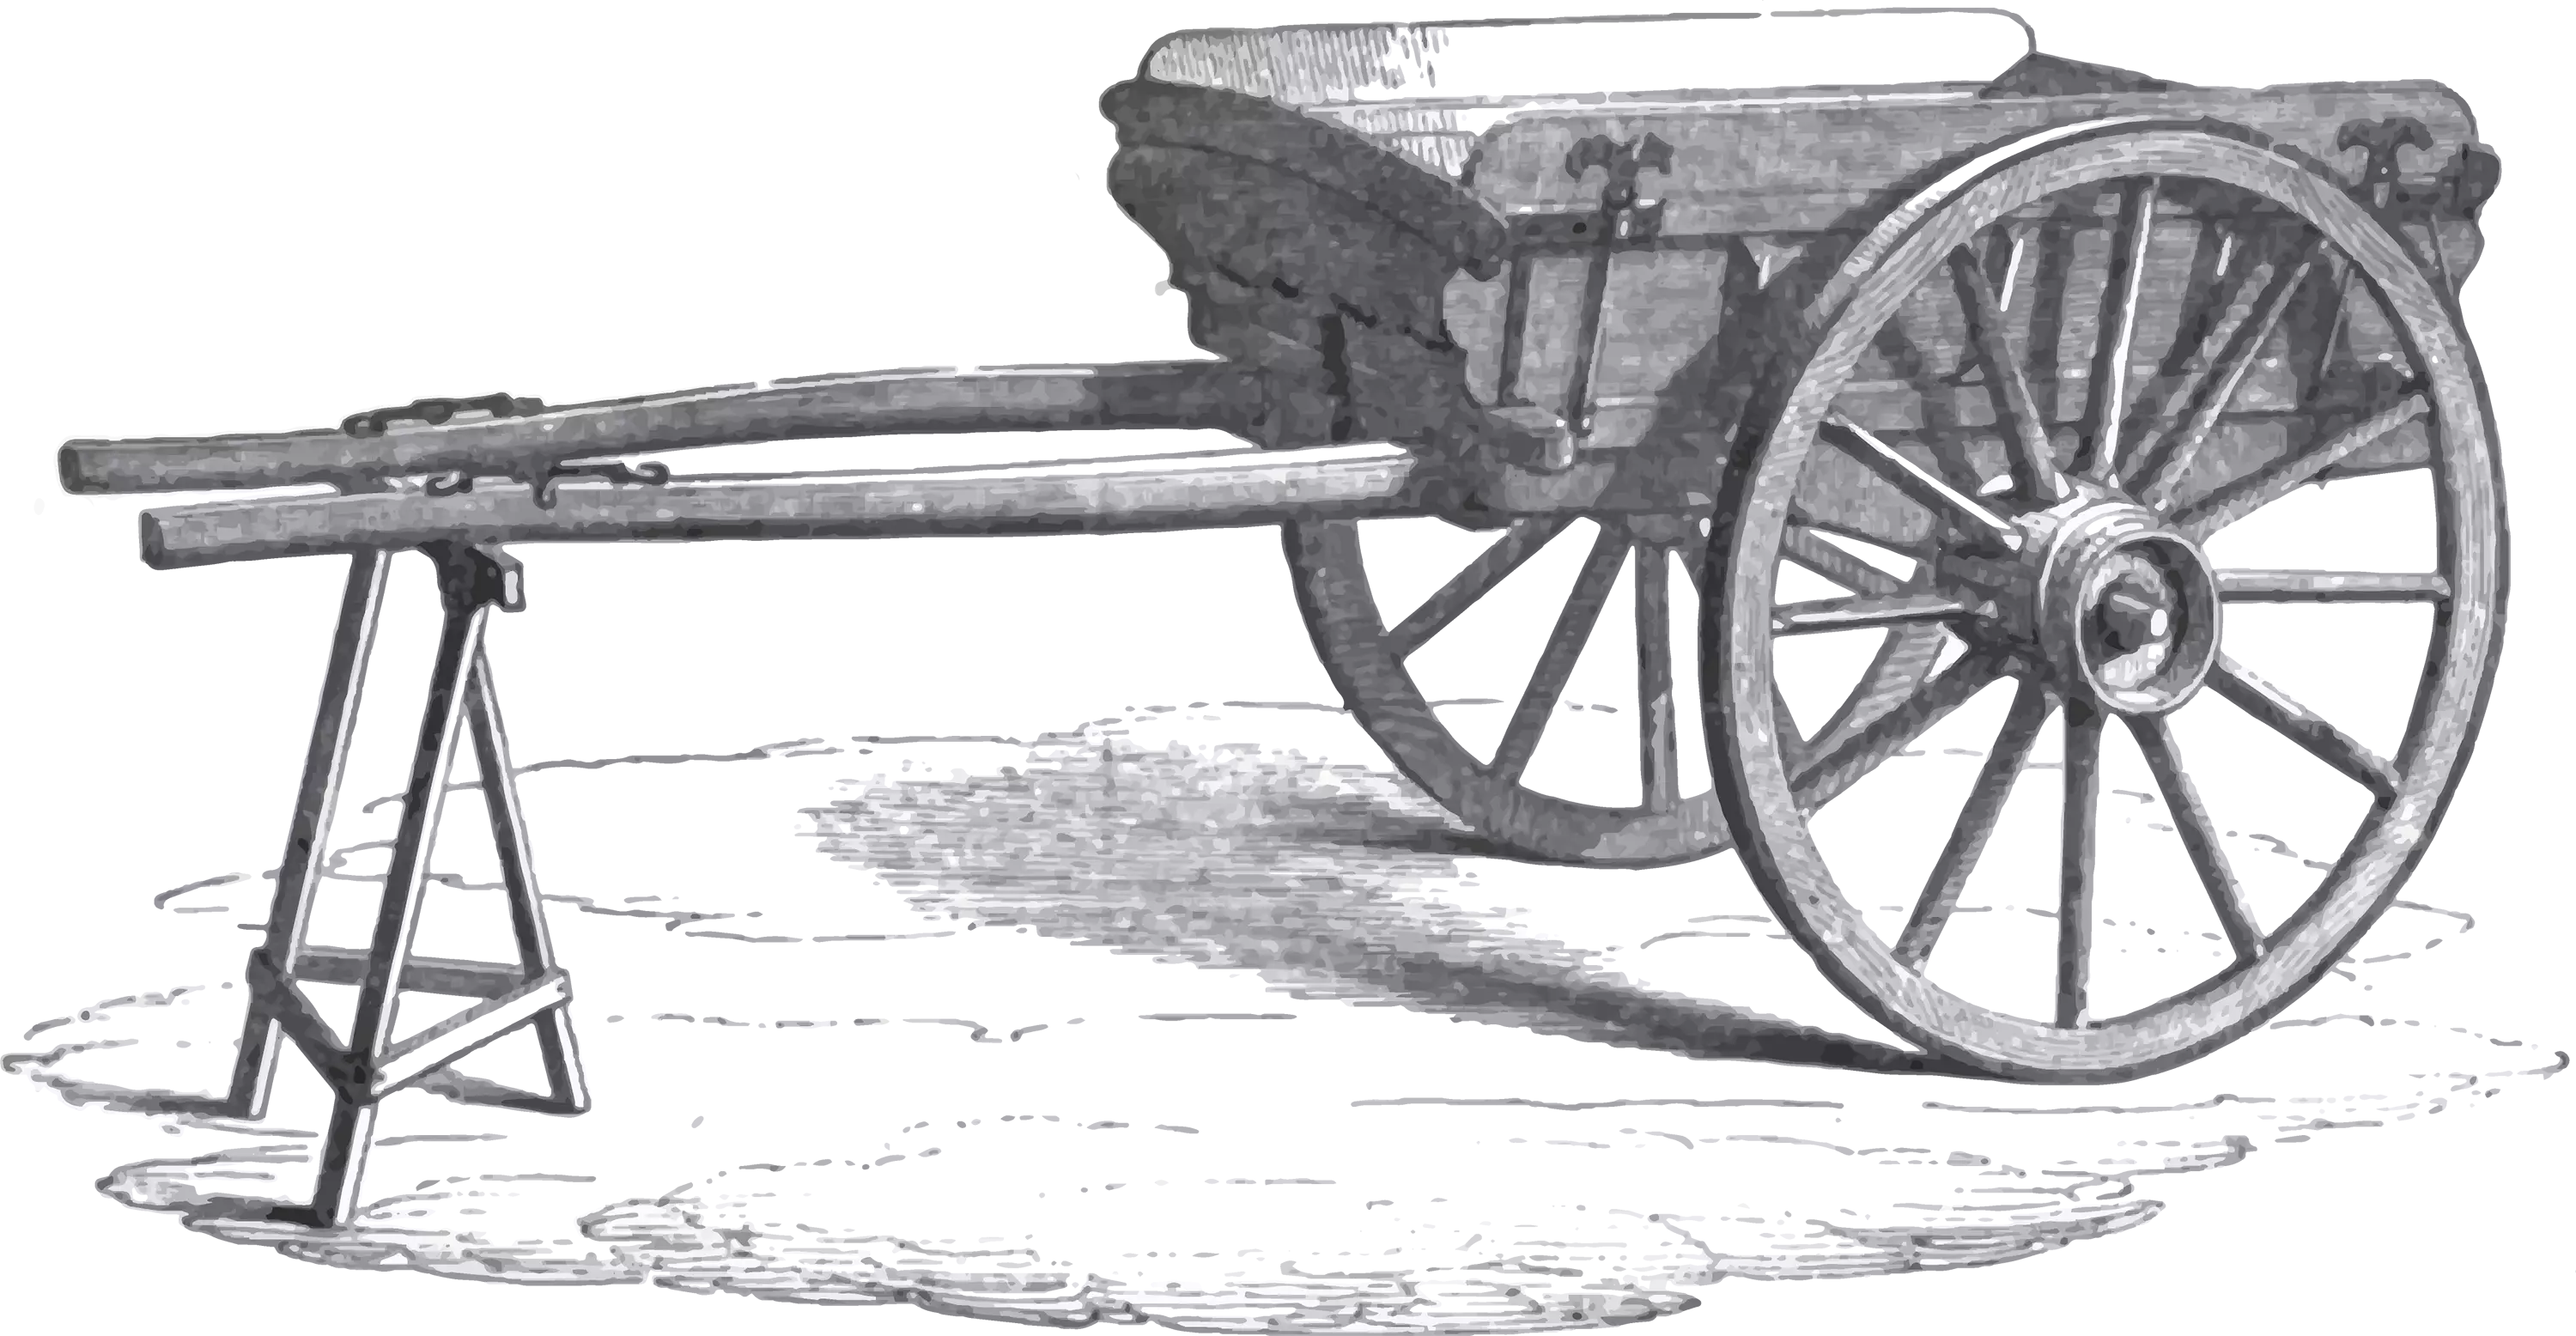 Tilt Cart. Source: The Book of Farm Implements and Machines, Slight & Burn, 1858, p413.